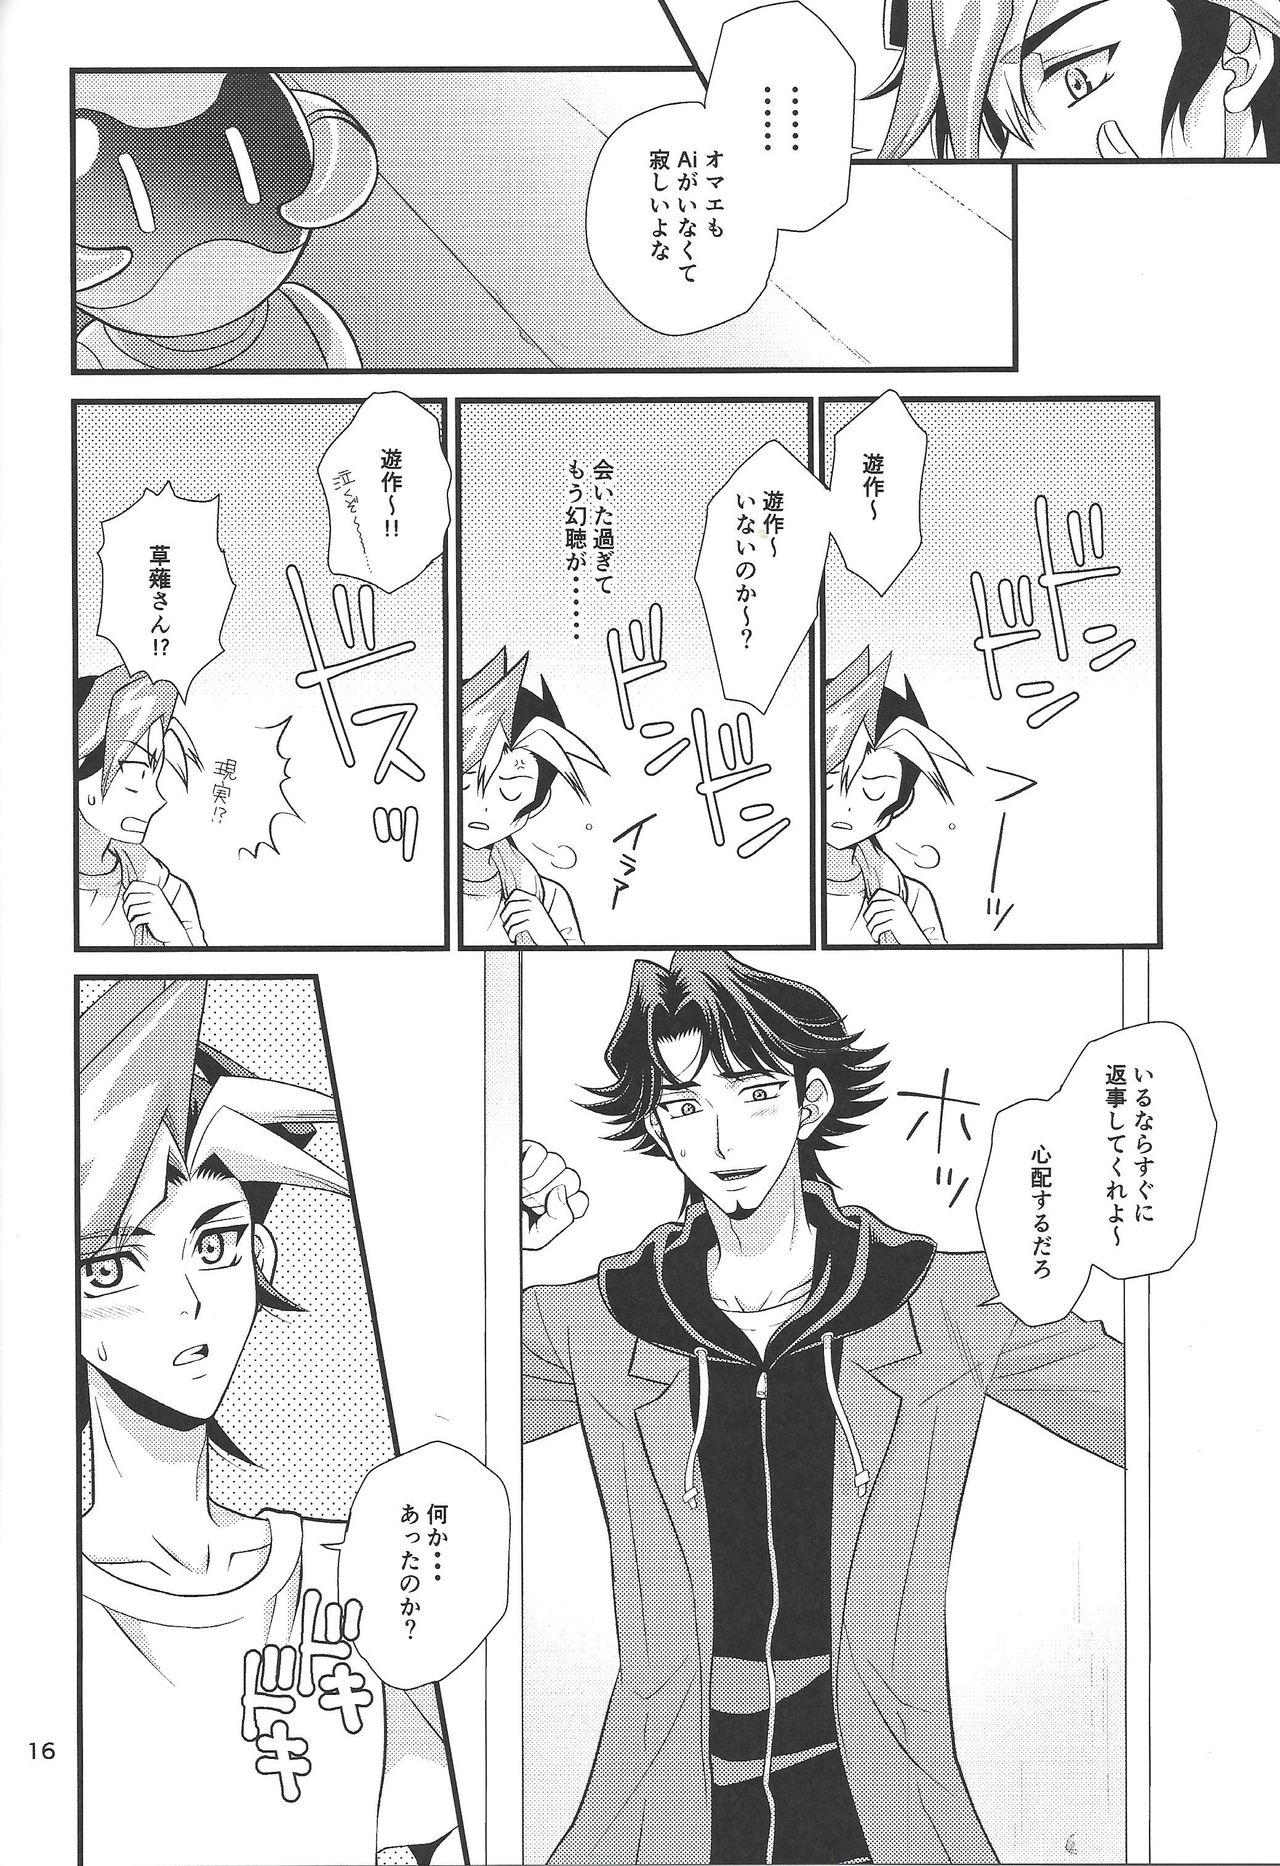 Tit bitter sweet - Yu-gi-oh vrains Oriental - Page 9